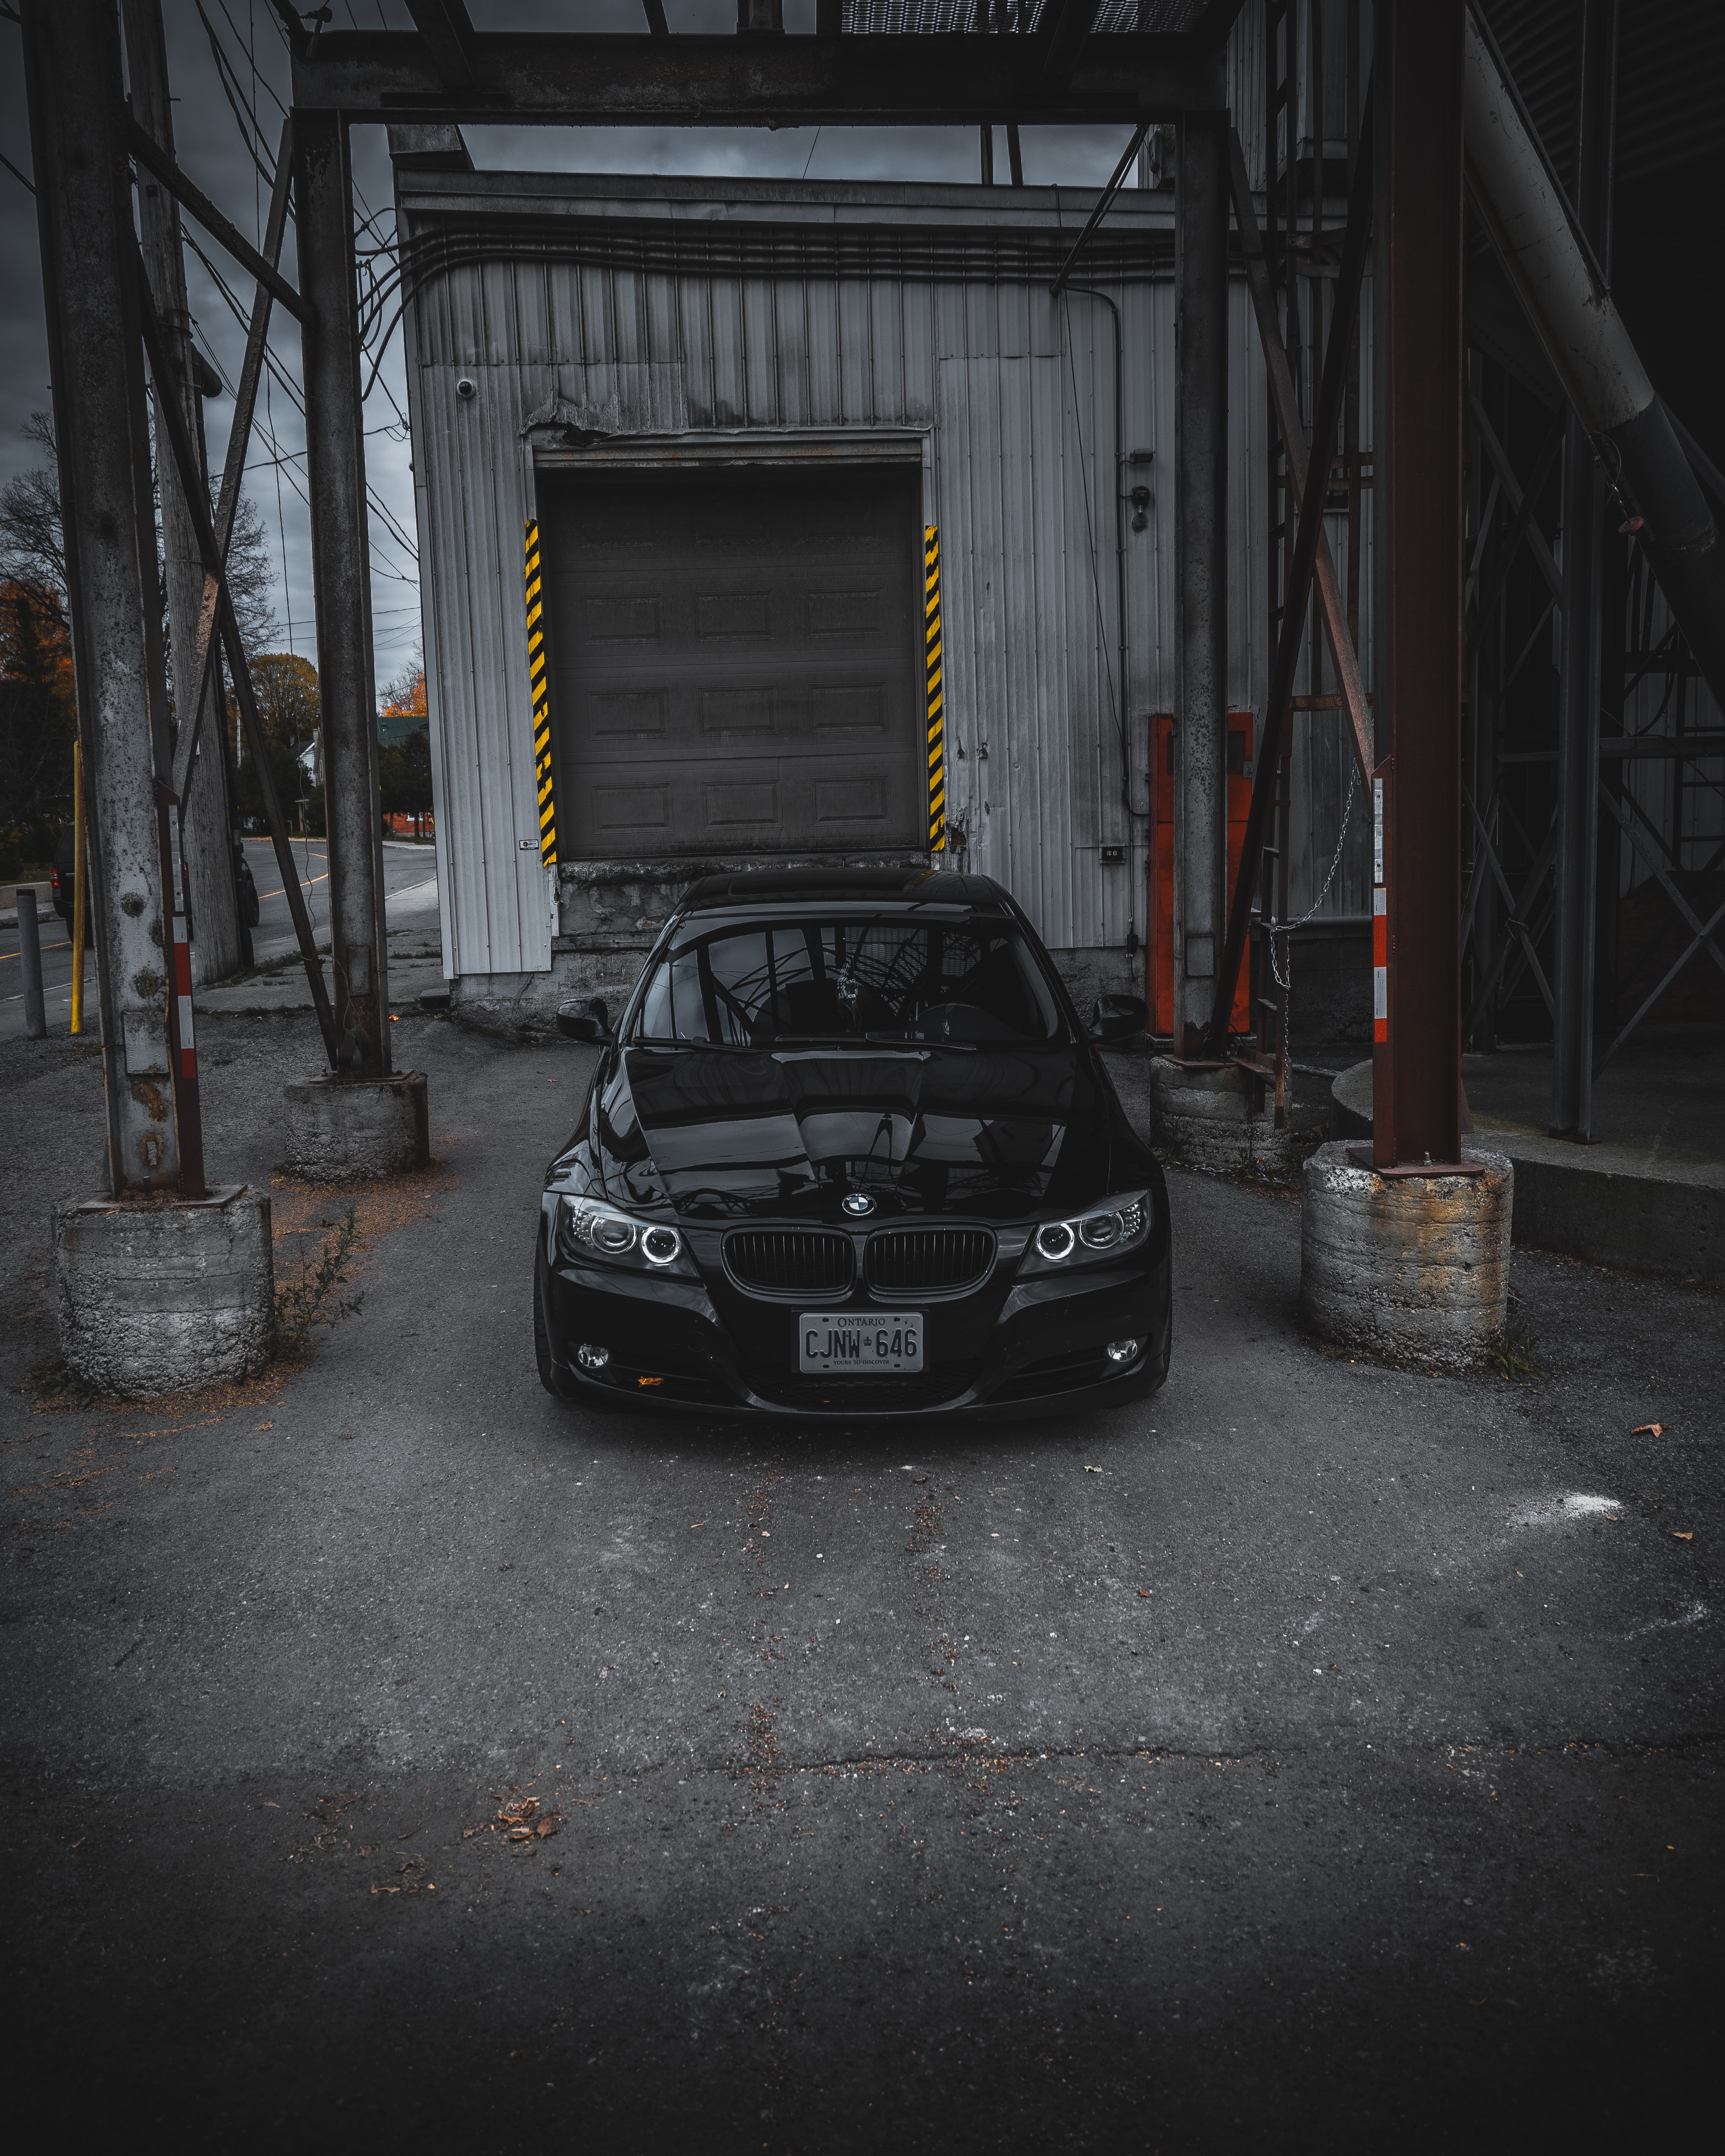 Free Images cars, garage, front view, bmw Car